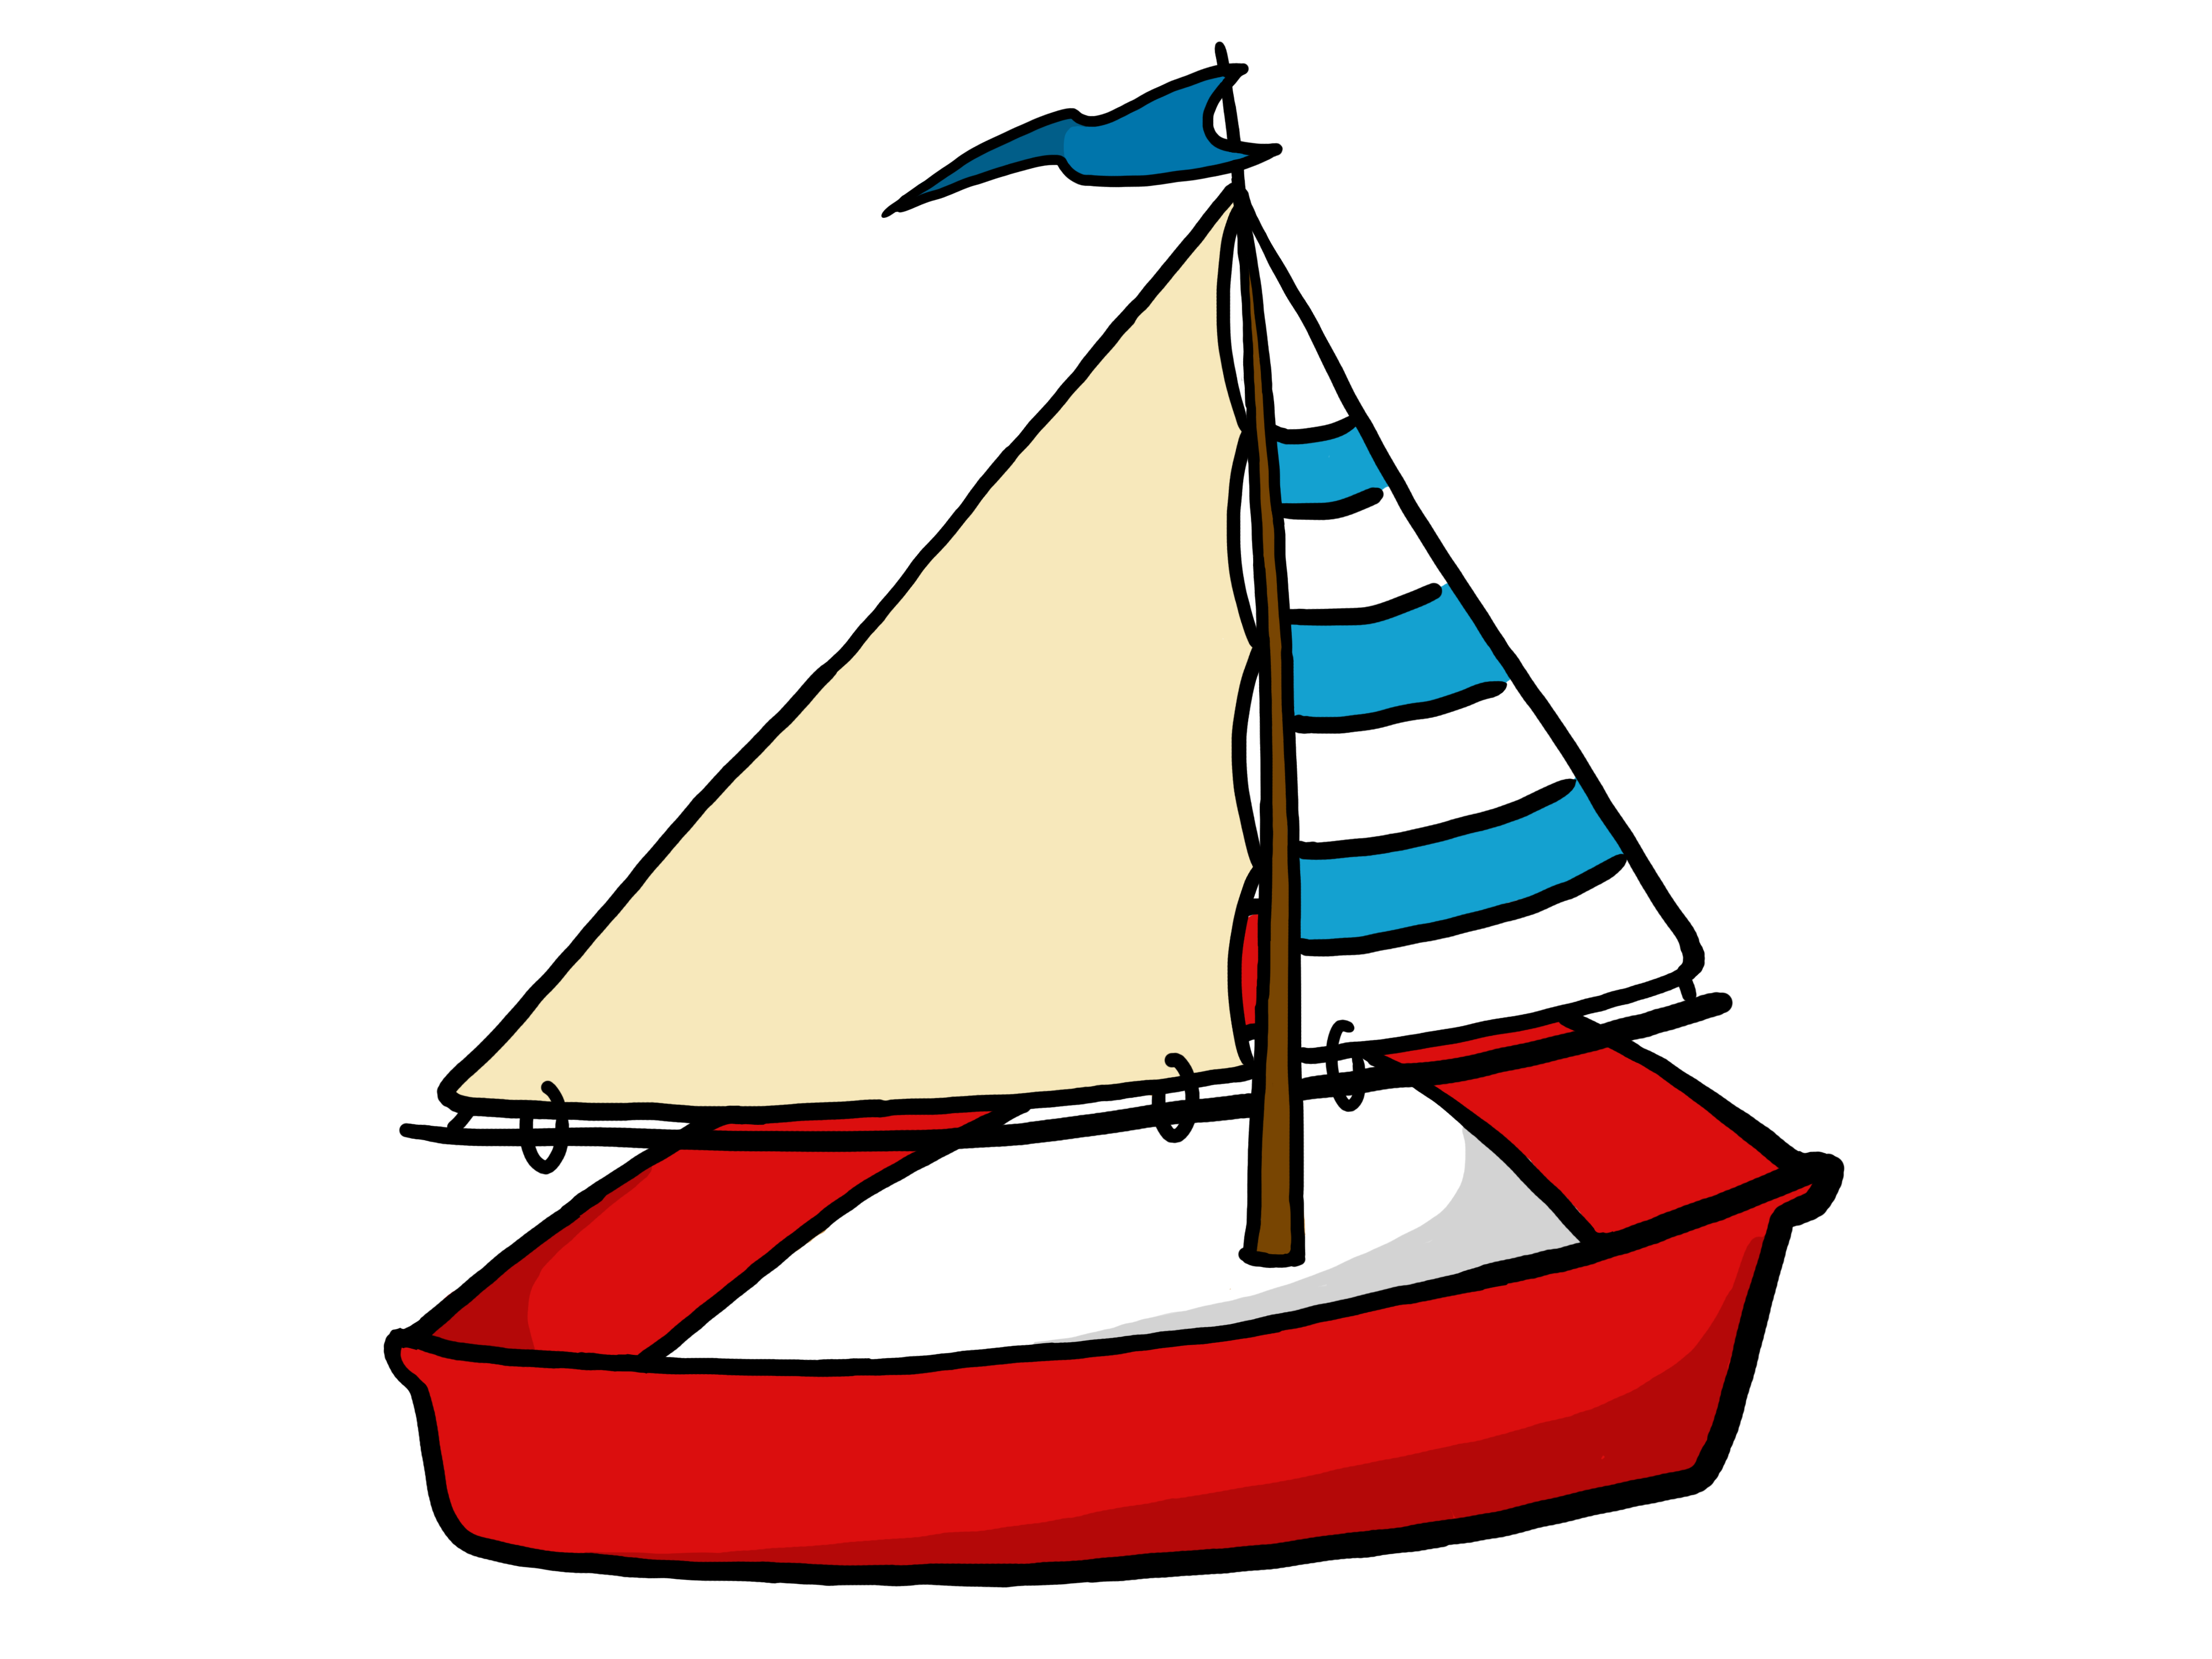 Boating Clipart | Clipart Panda - Free Clipart Images